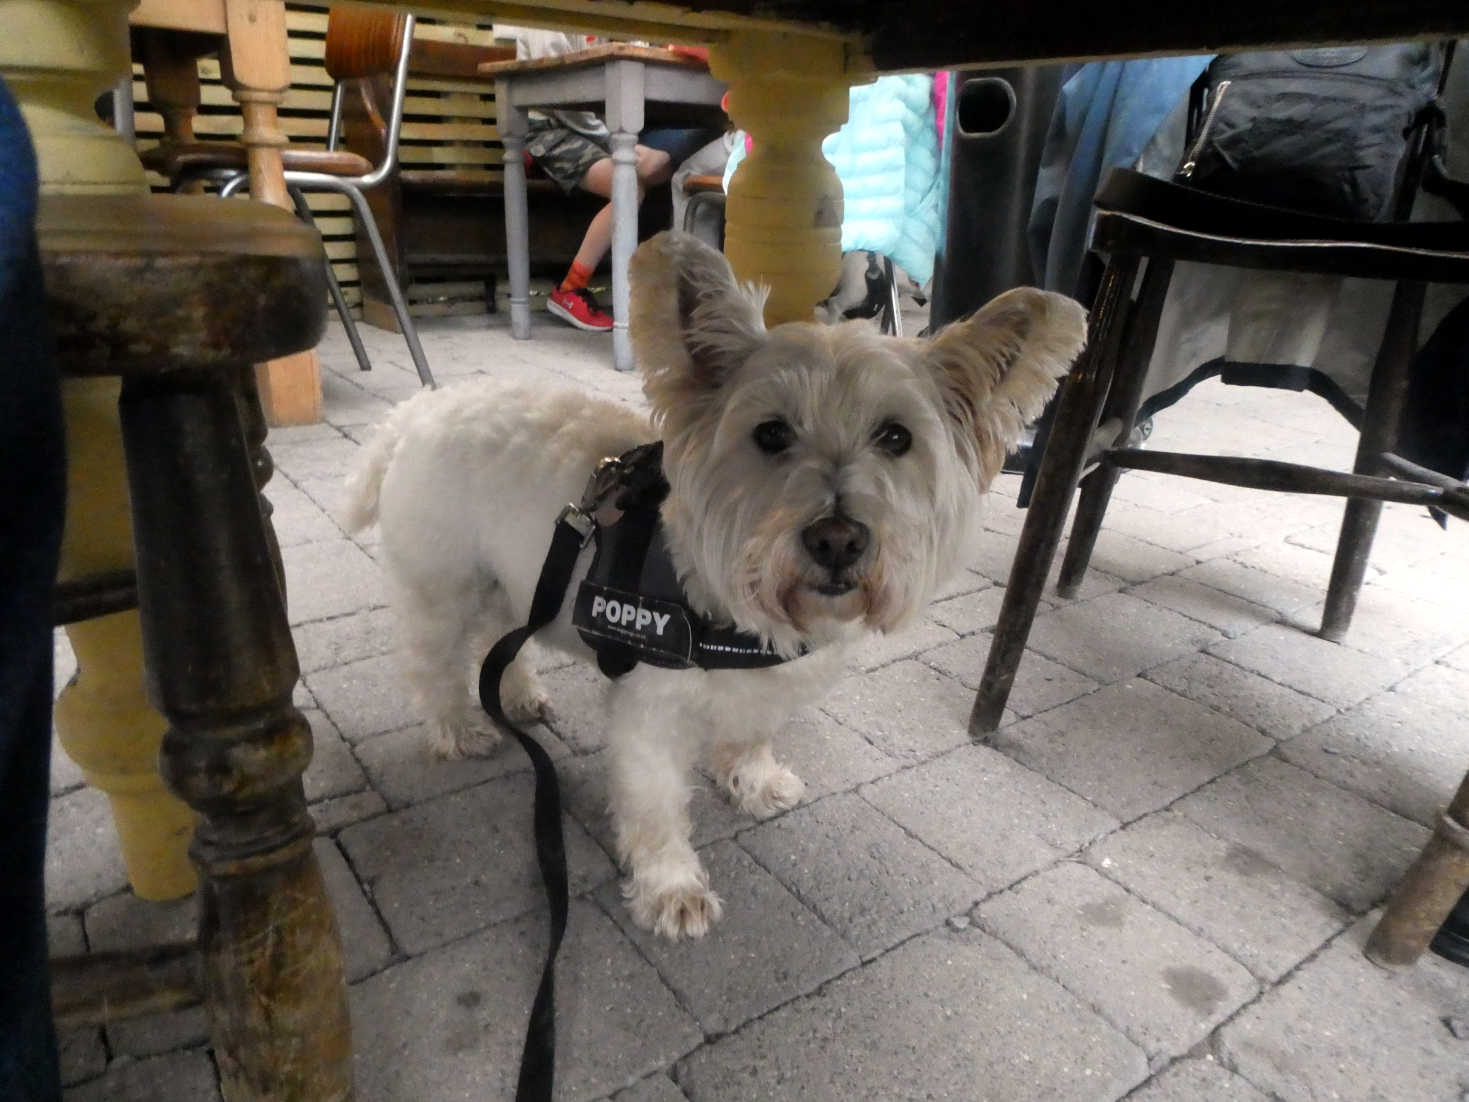 Poppy the Westie at diner in the golden lion Newport